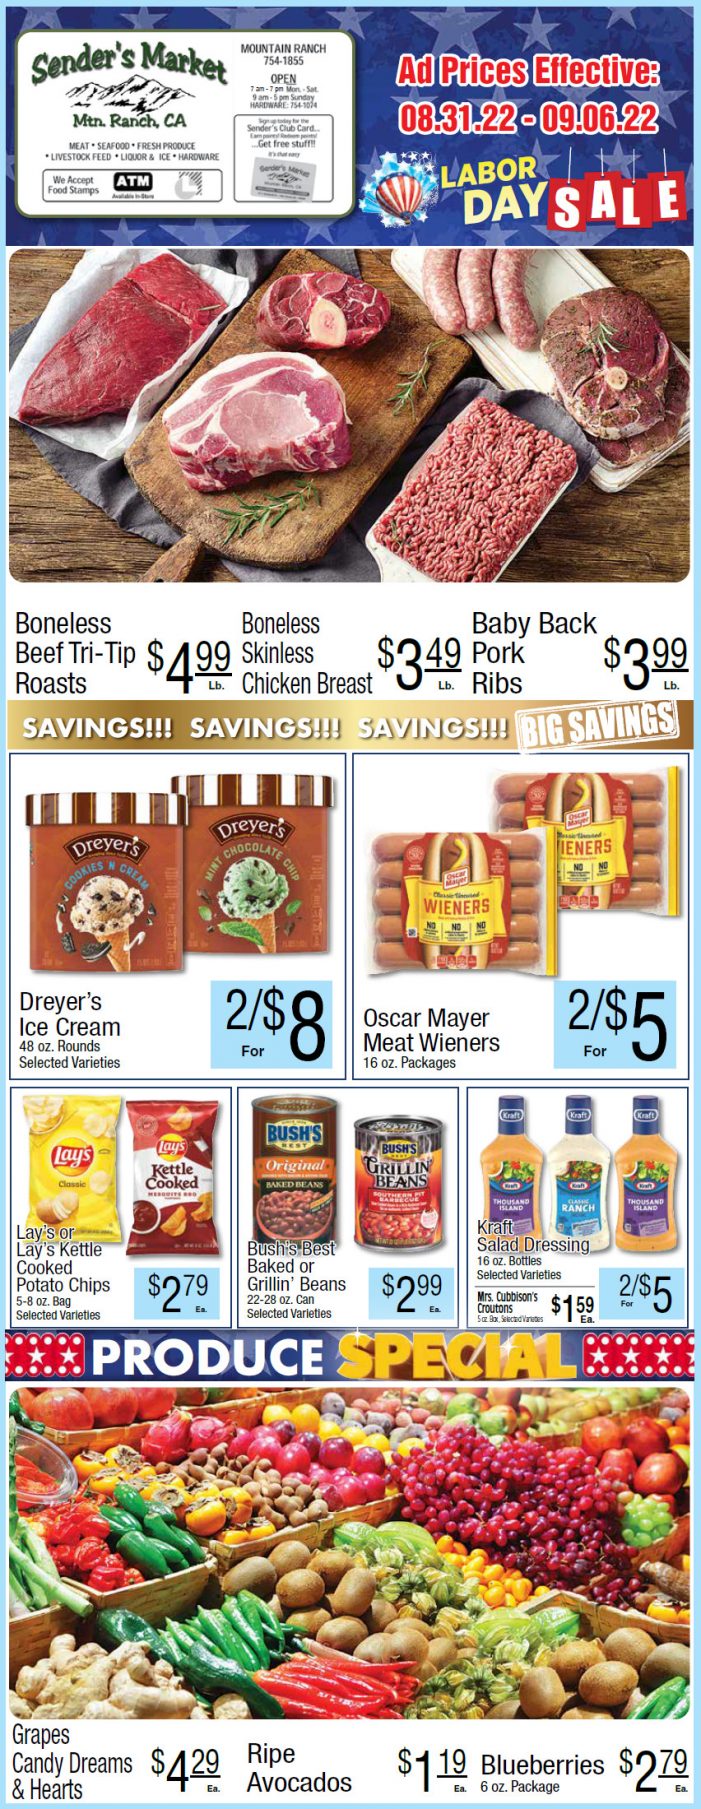 Sender’s Market Weekly Ad & Grocery Specials Through September 6th! Shop Local & Save!